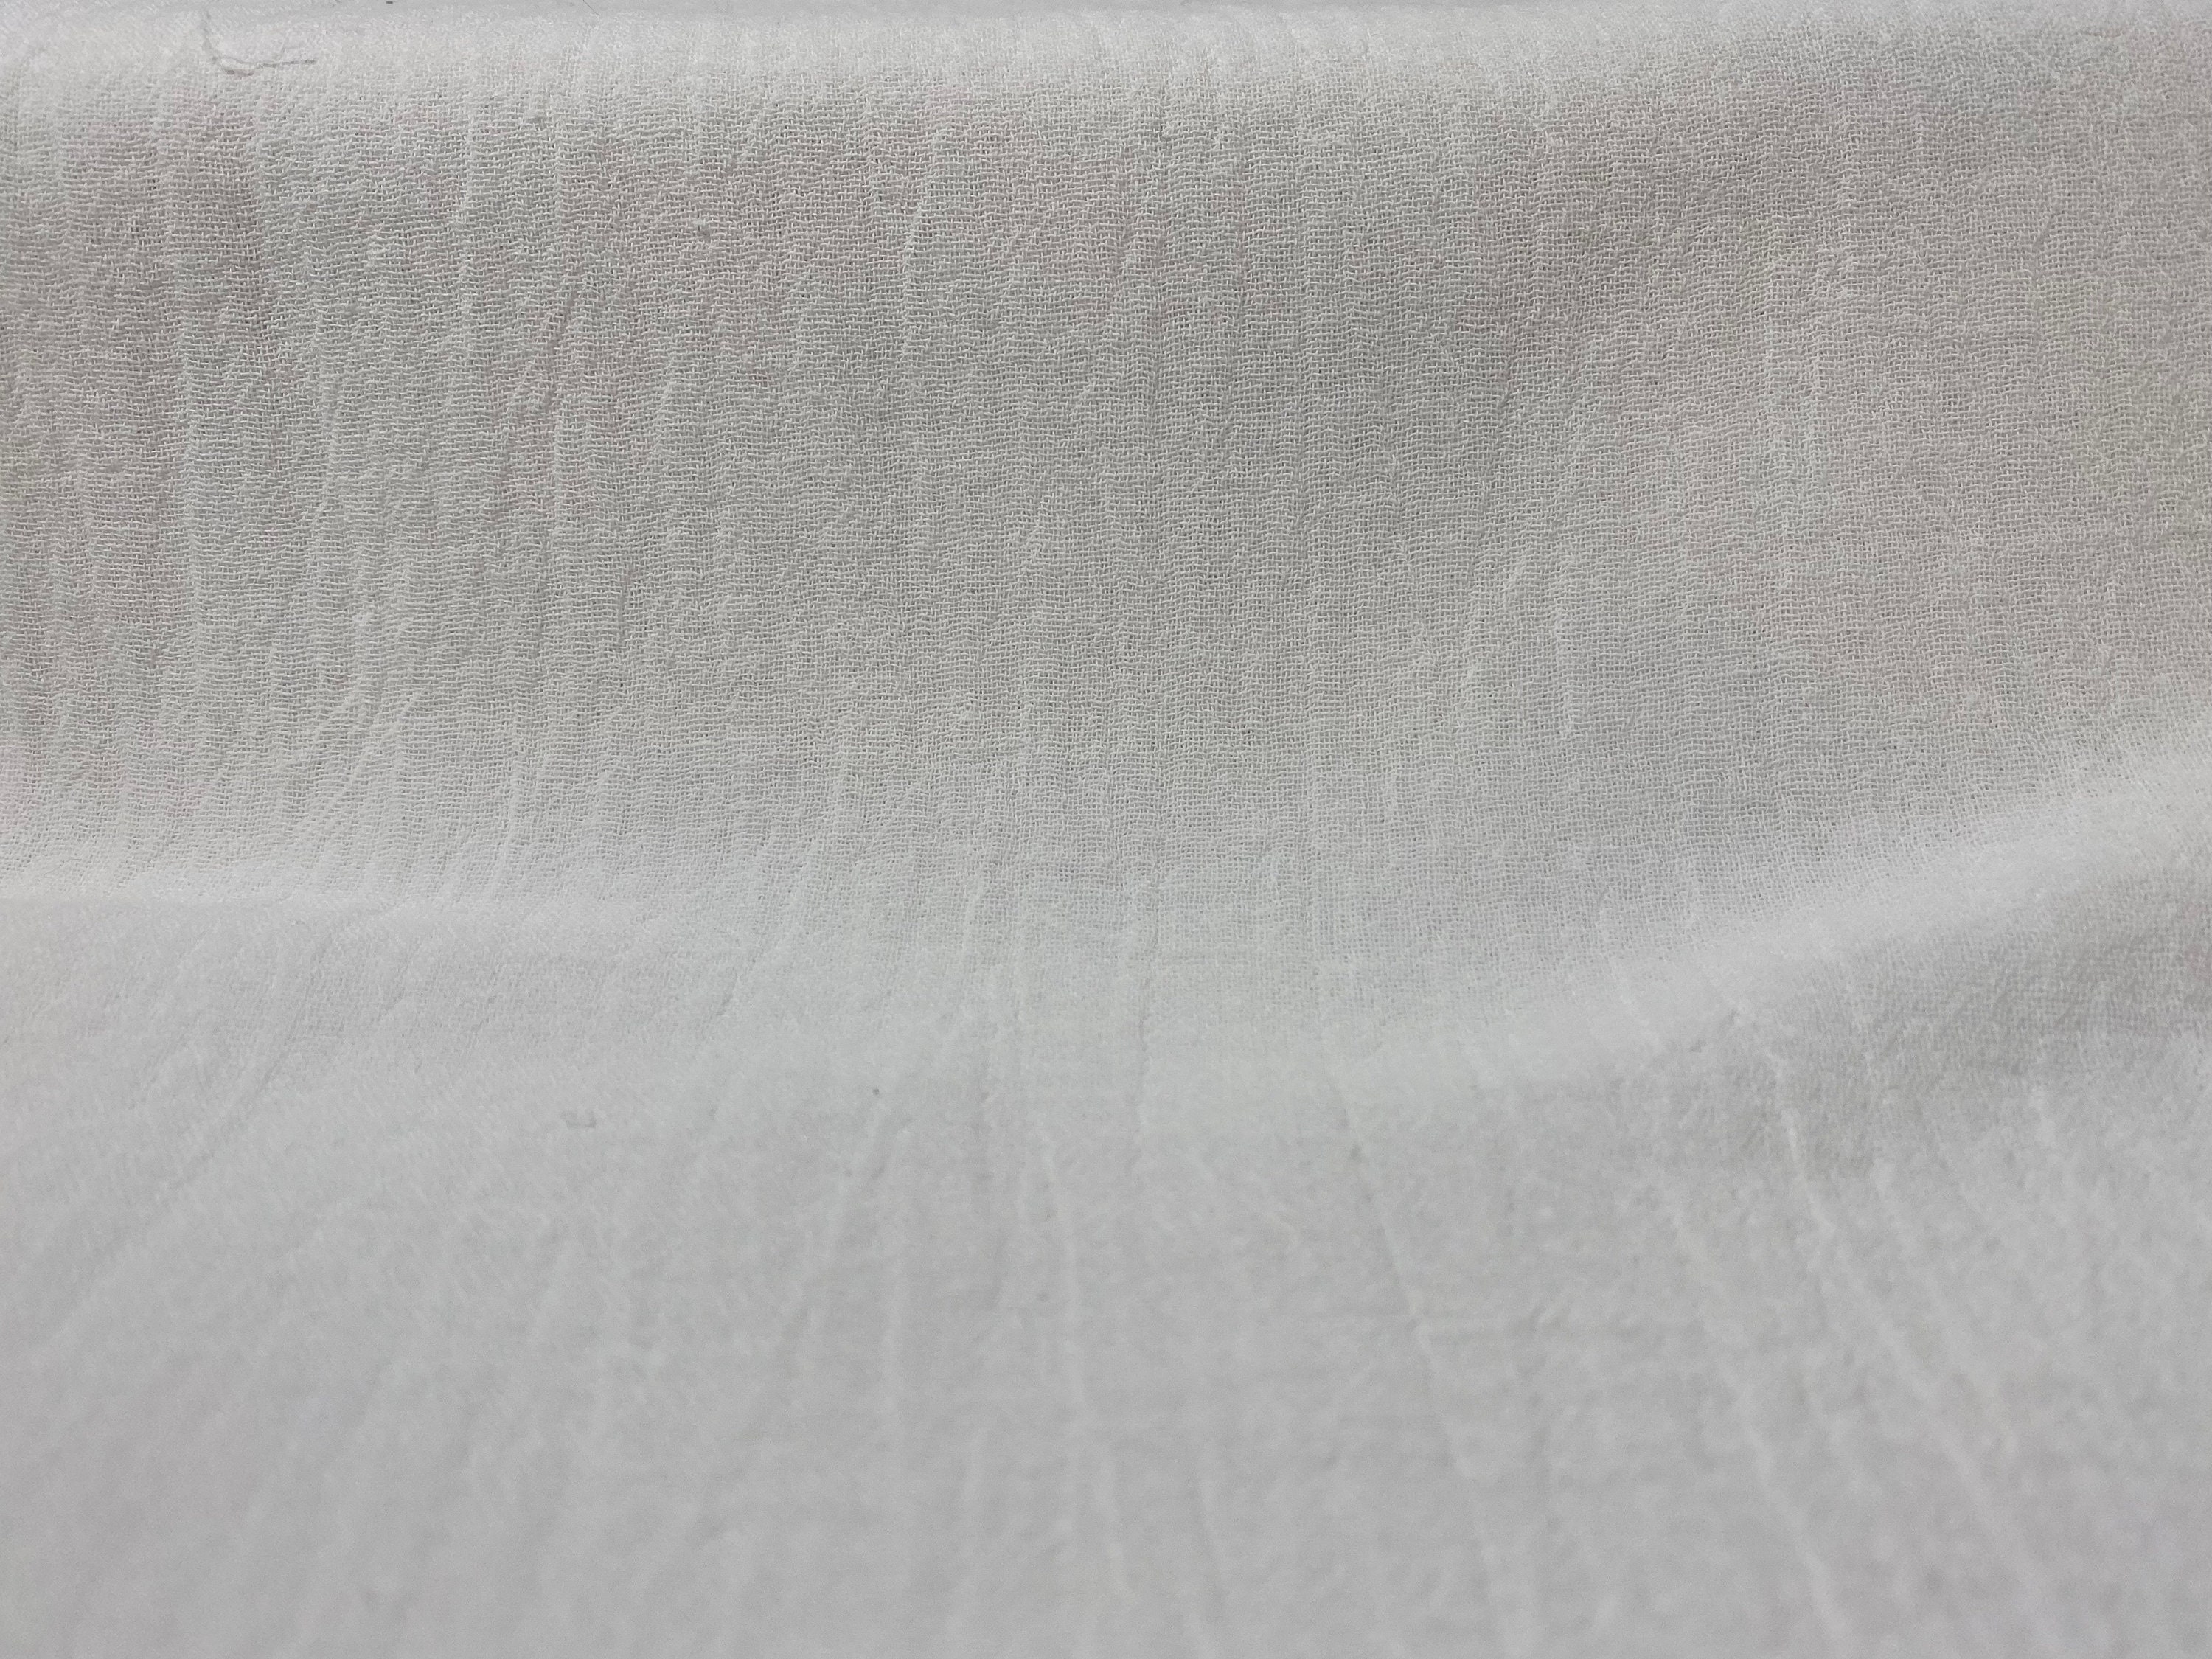 Cotton Bubble Gauze Fabric by the Yard White 100% Cotton - Etsy